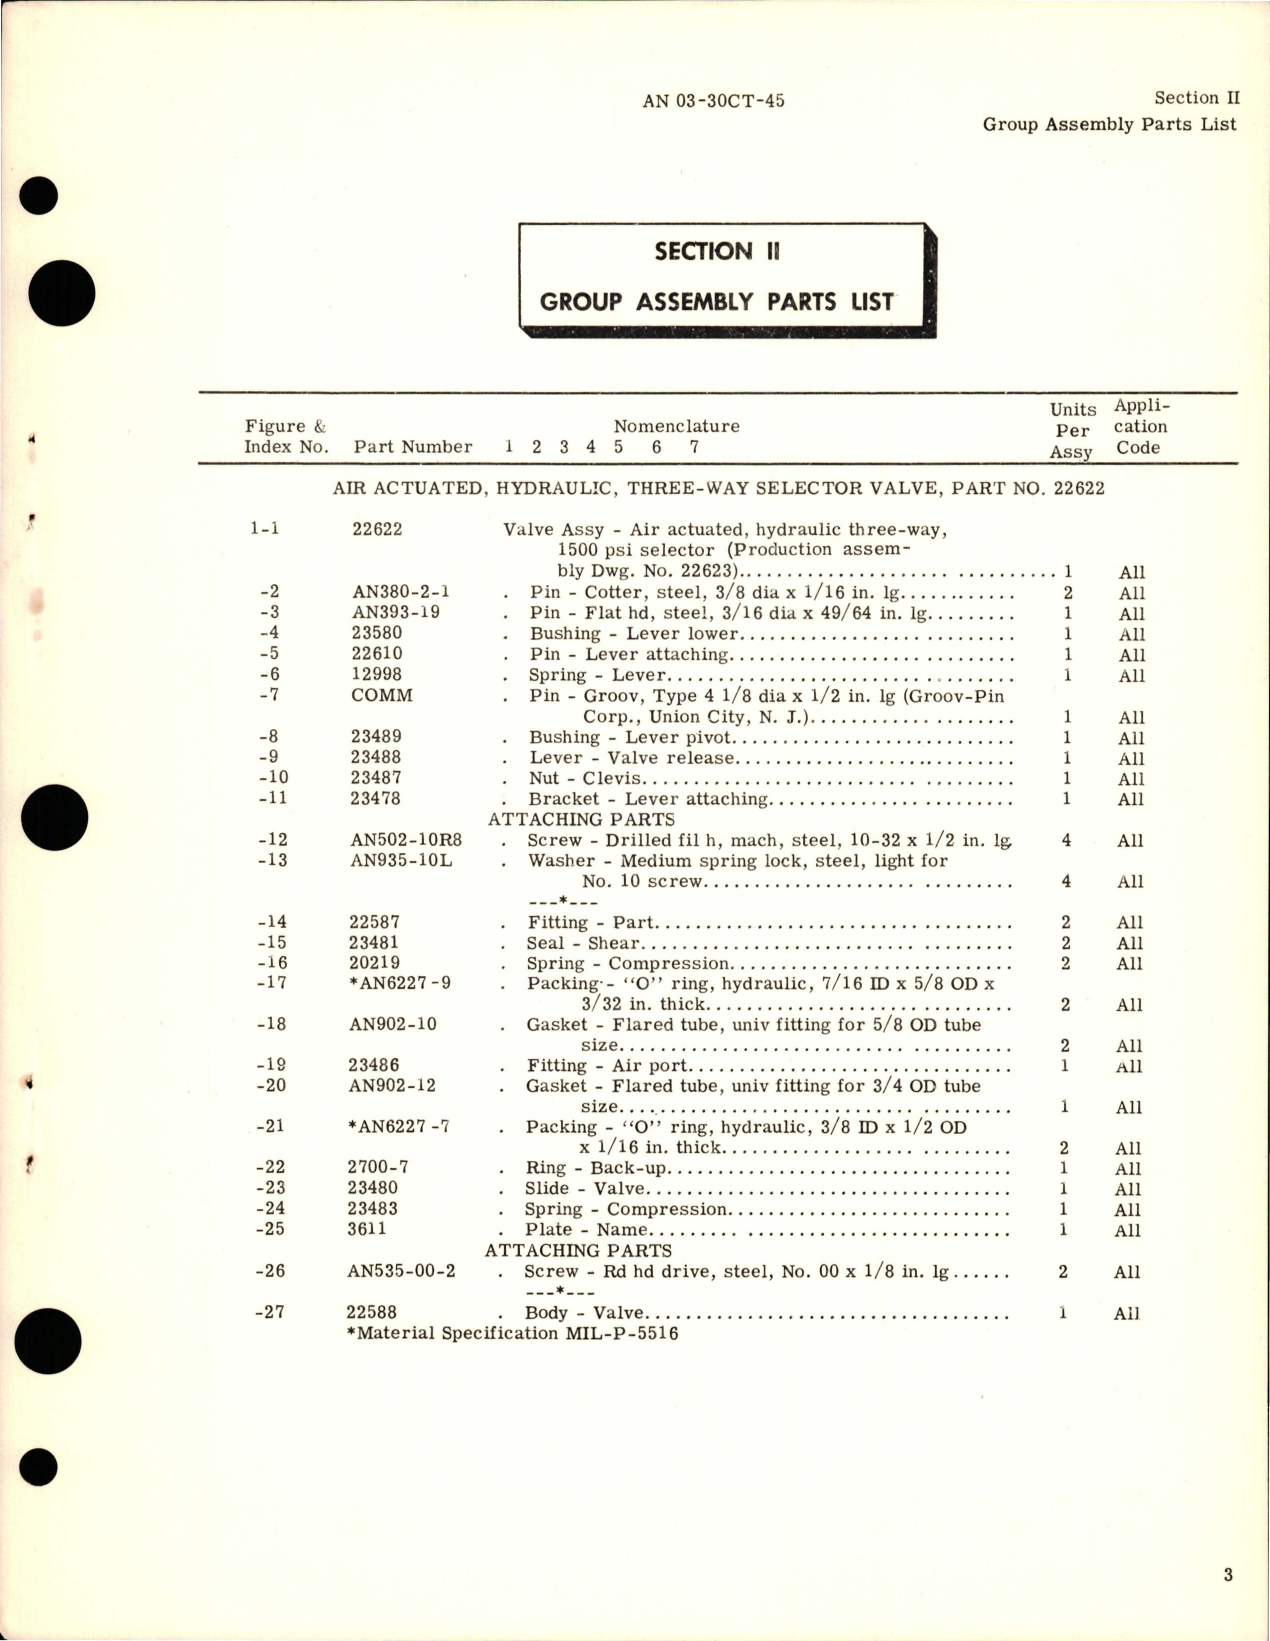 Sample page 5 from AirCorps Library document: Parts Catalog for Hydraulic Three Way Selector Valve - Part 22622